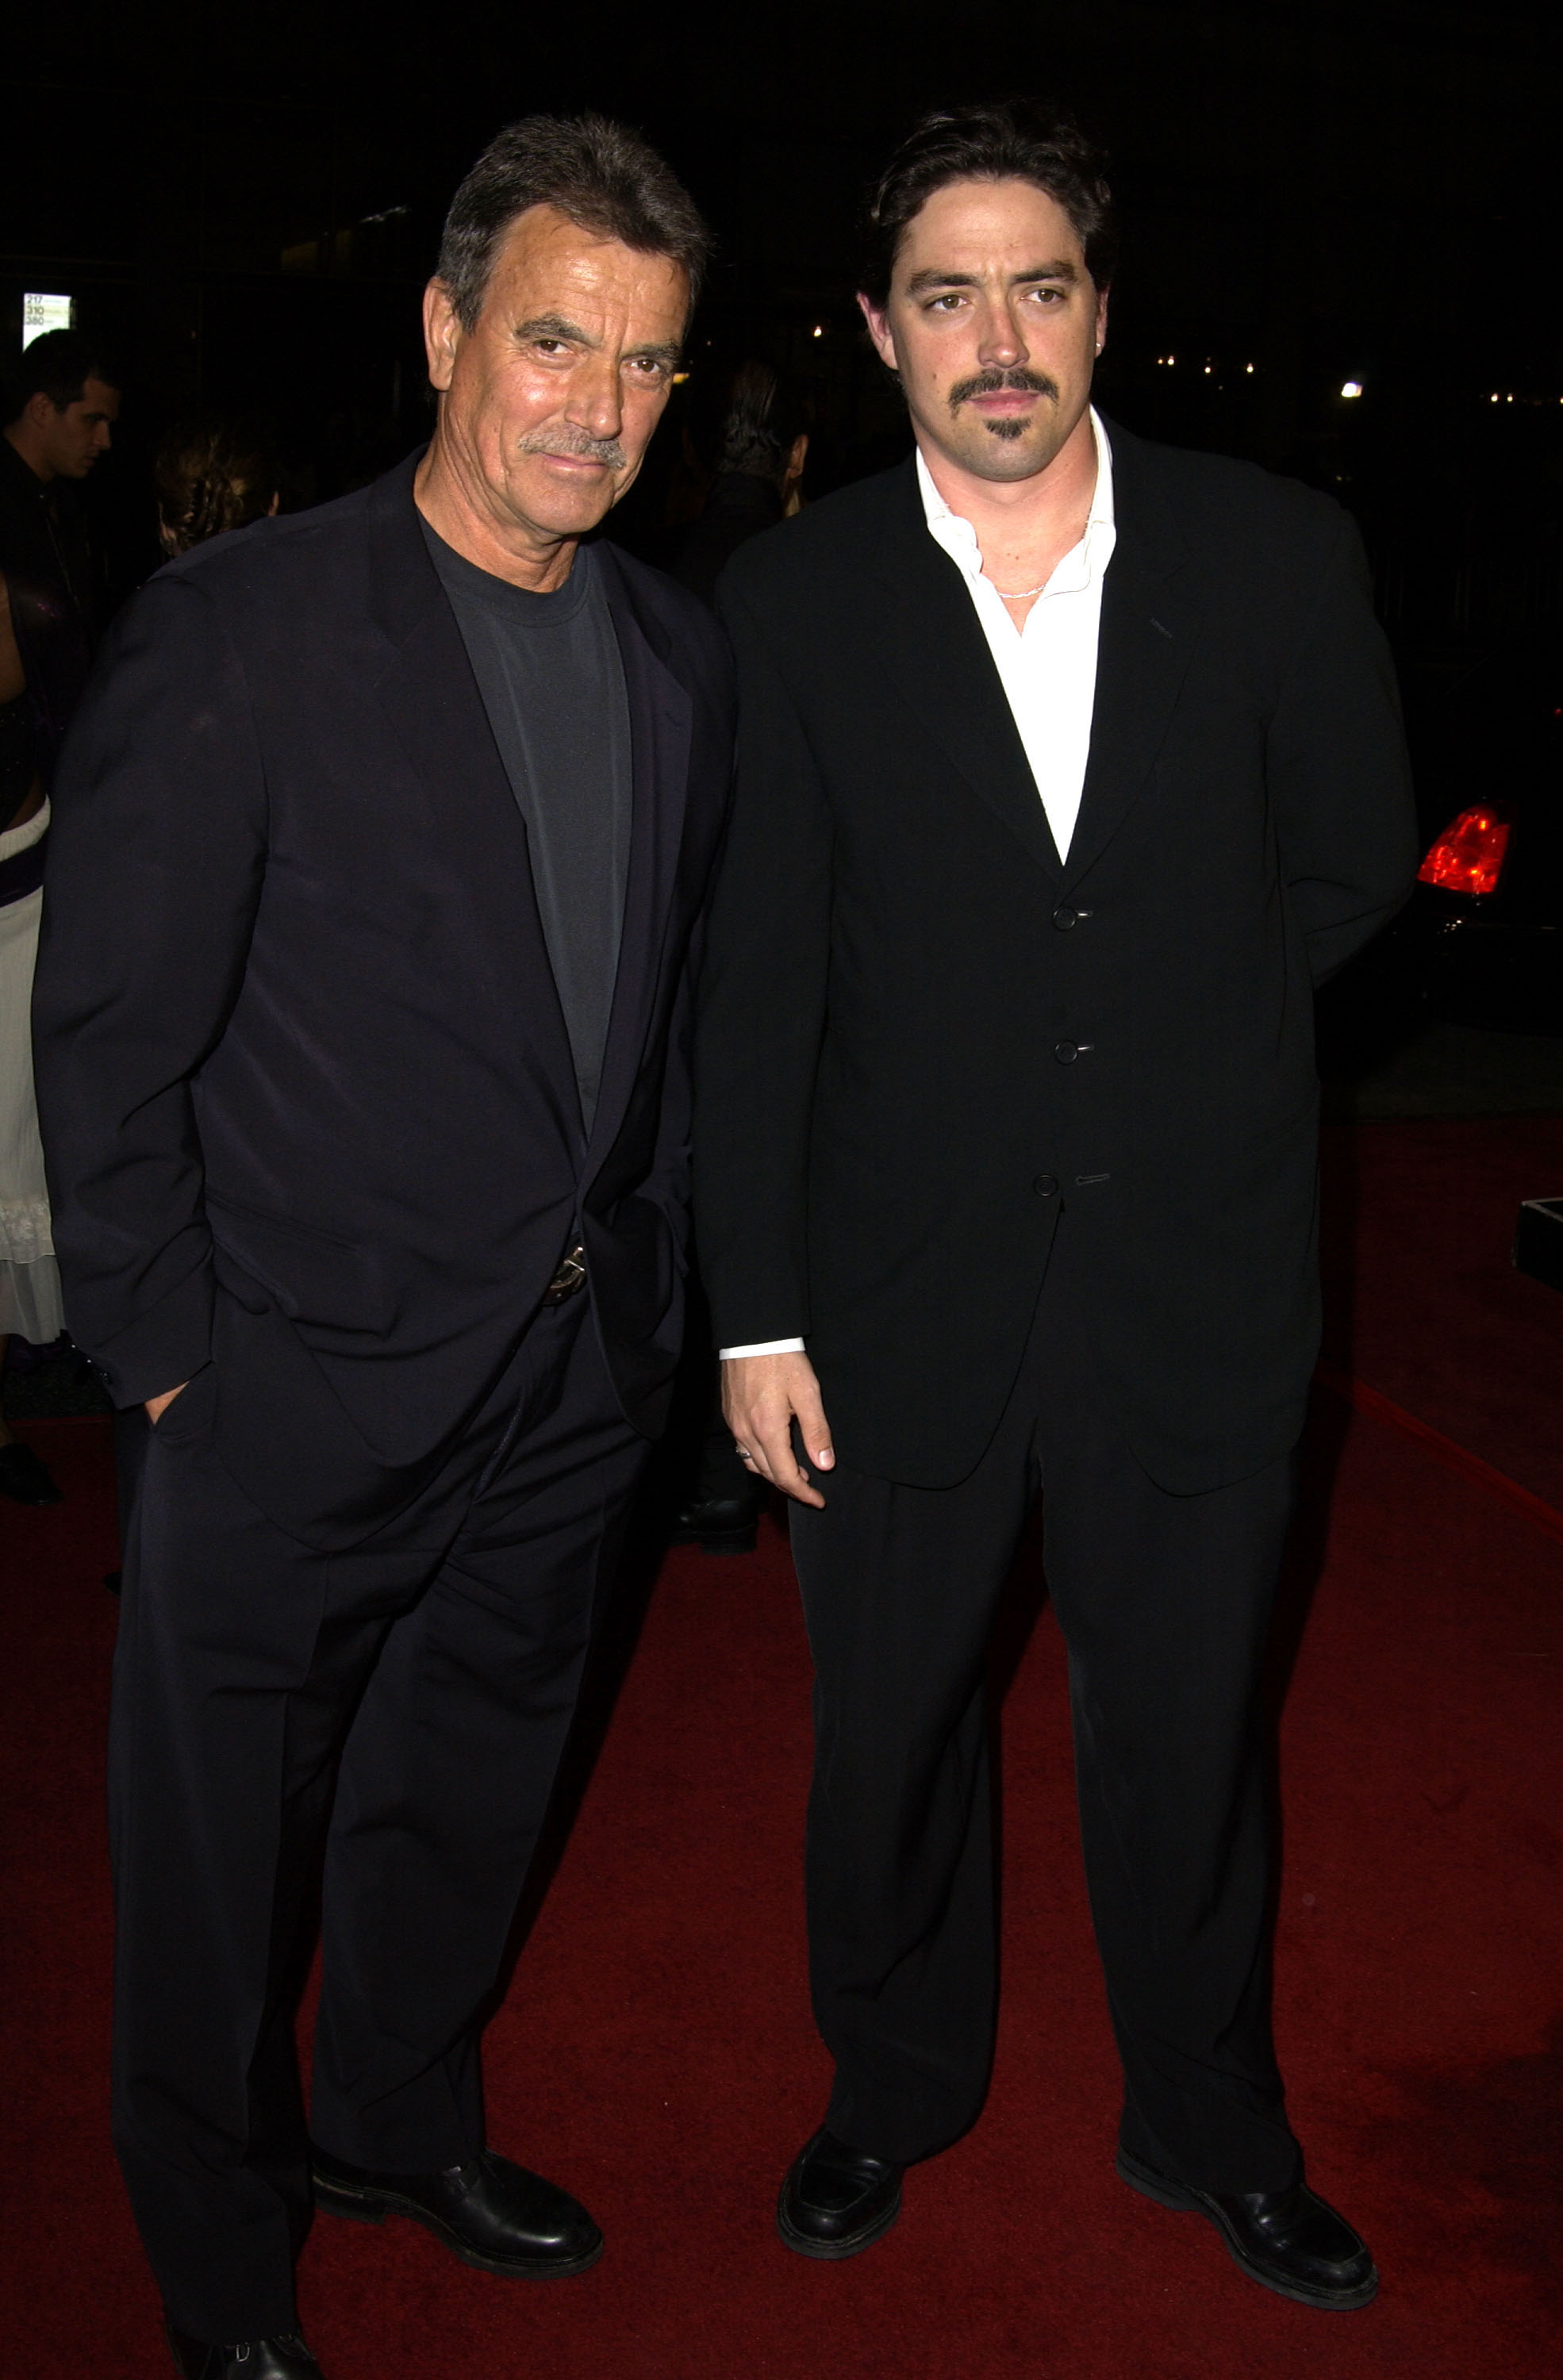 Eric Braeden and his son Christian Gudegast during the "A Man Apart" premiere in Hollywood, California, on April 1, 2003 | Source: Getty Images